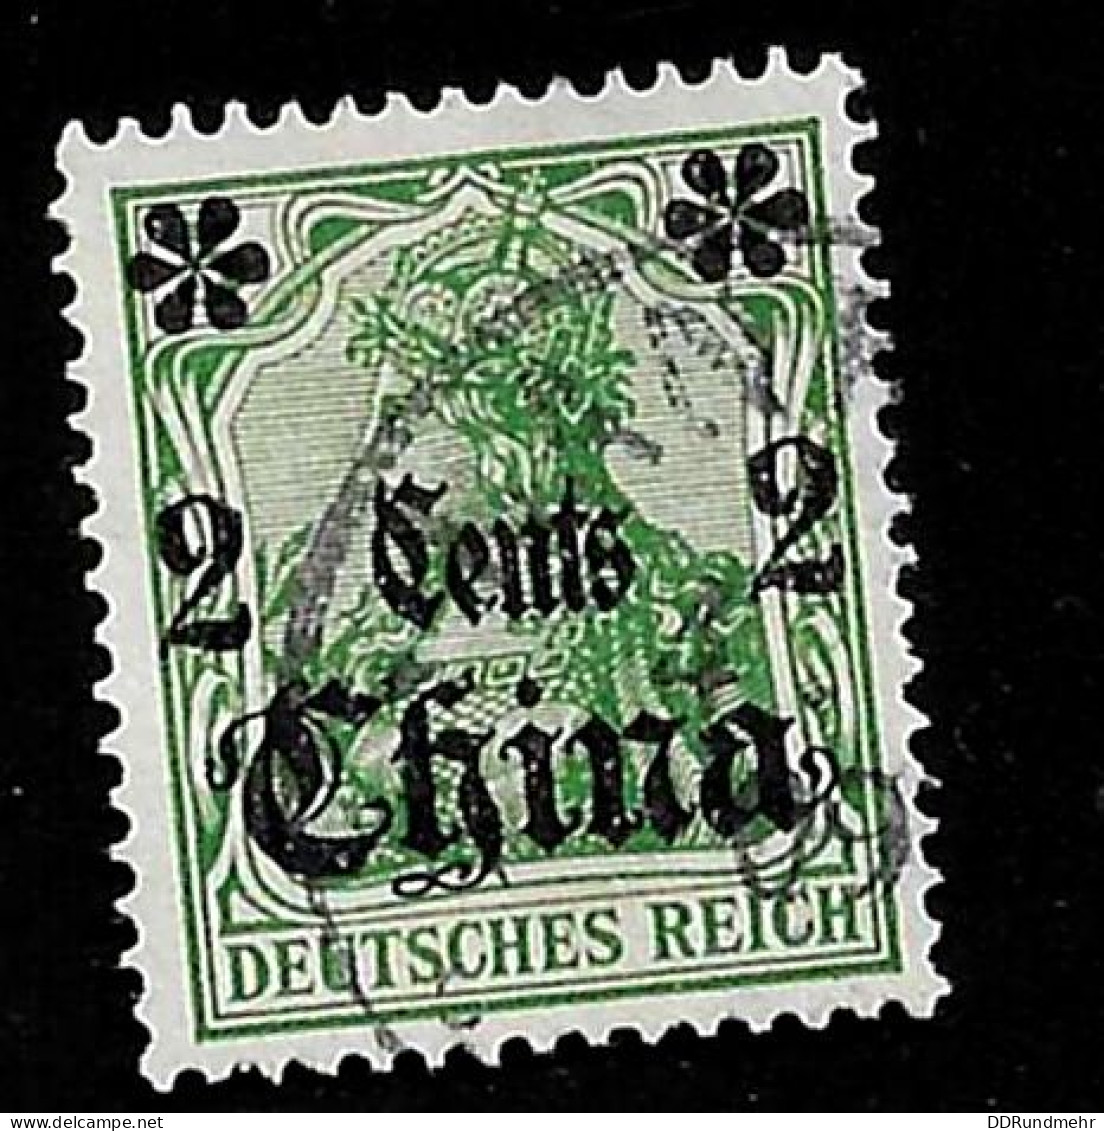 1905 Germania Michel DR-CHI 29 Stamp Number DR-CHI 38 Yvert Et Tellier DR-CHI 30 Used - Deutsche Post In China